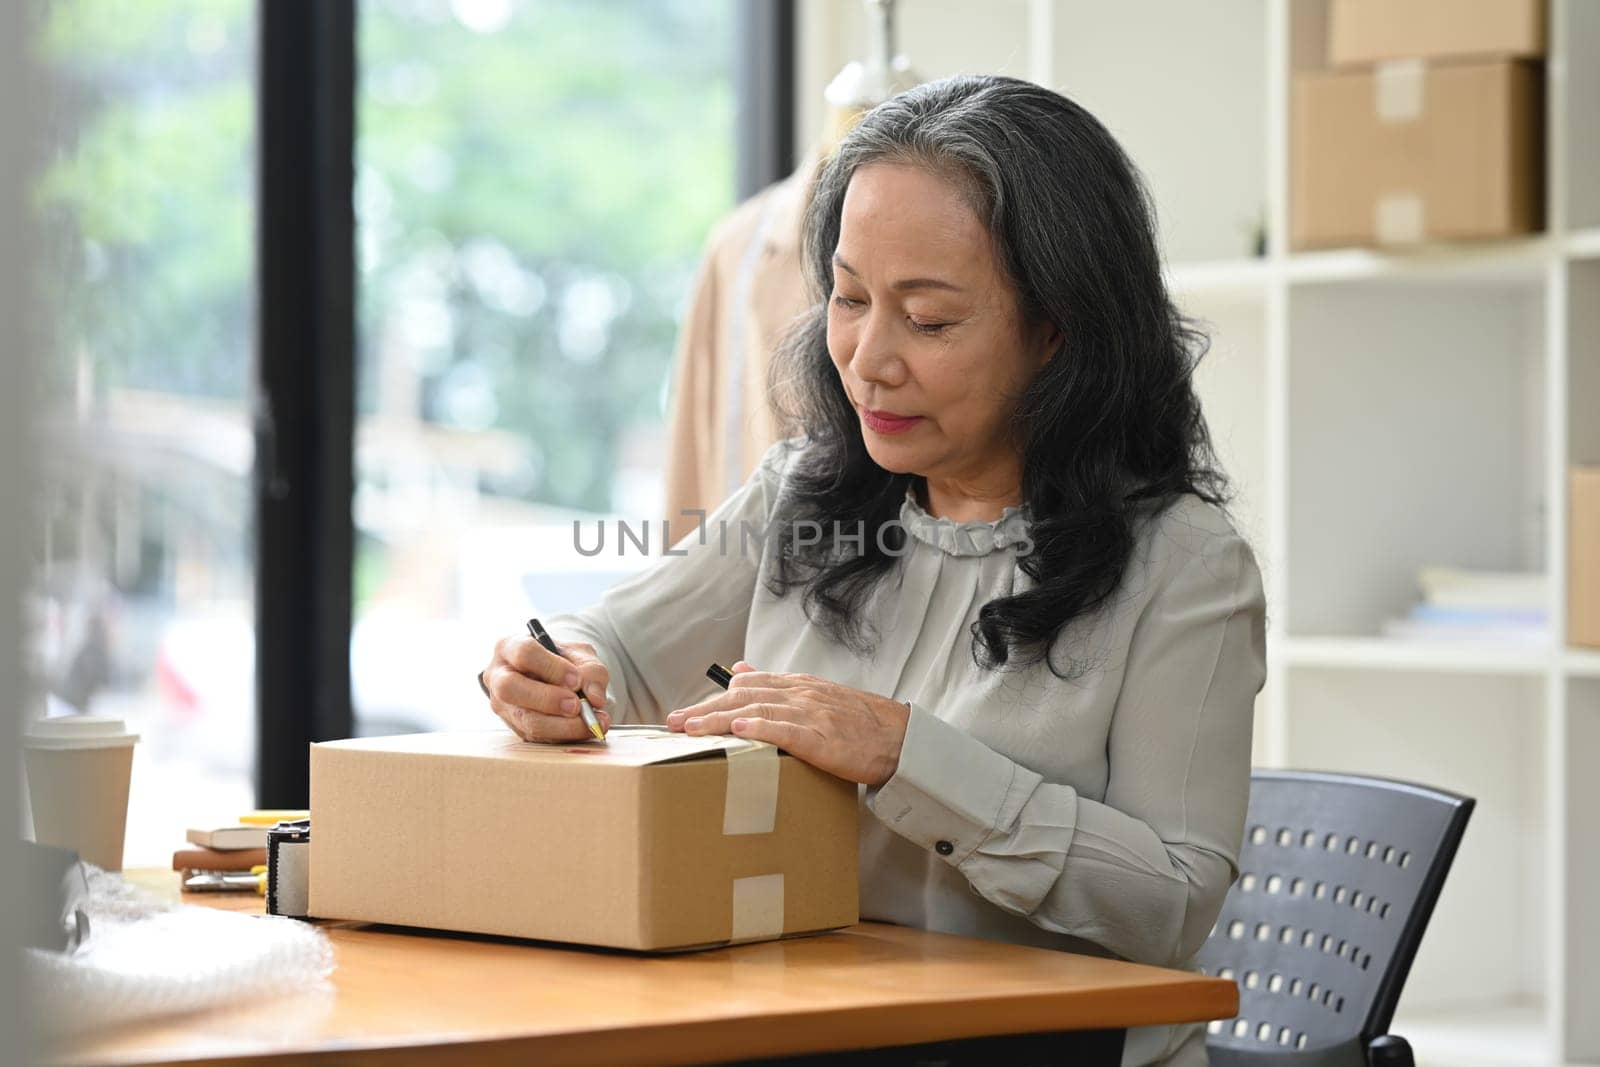 Middle aged woman entrepreneur writing address on cardboard for delivery to customers.